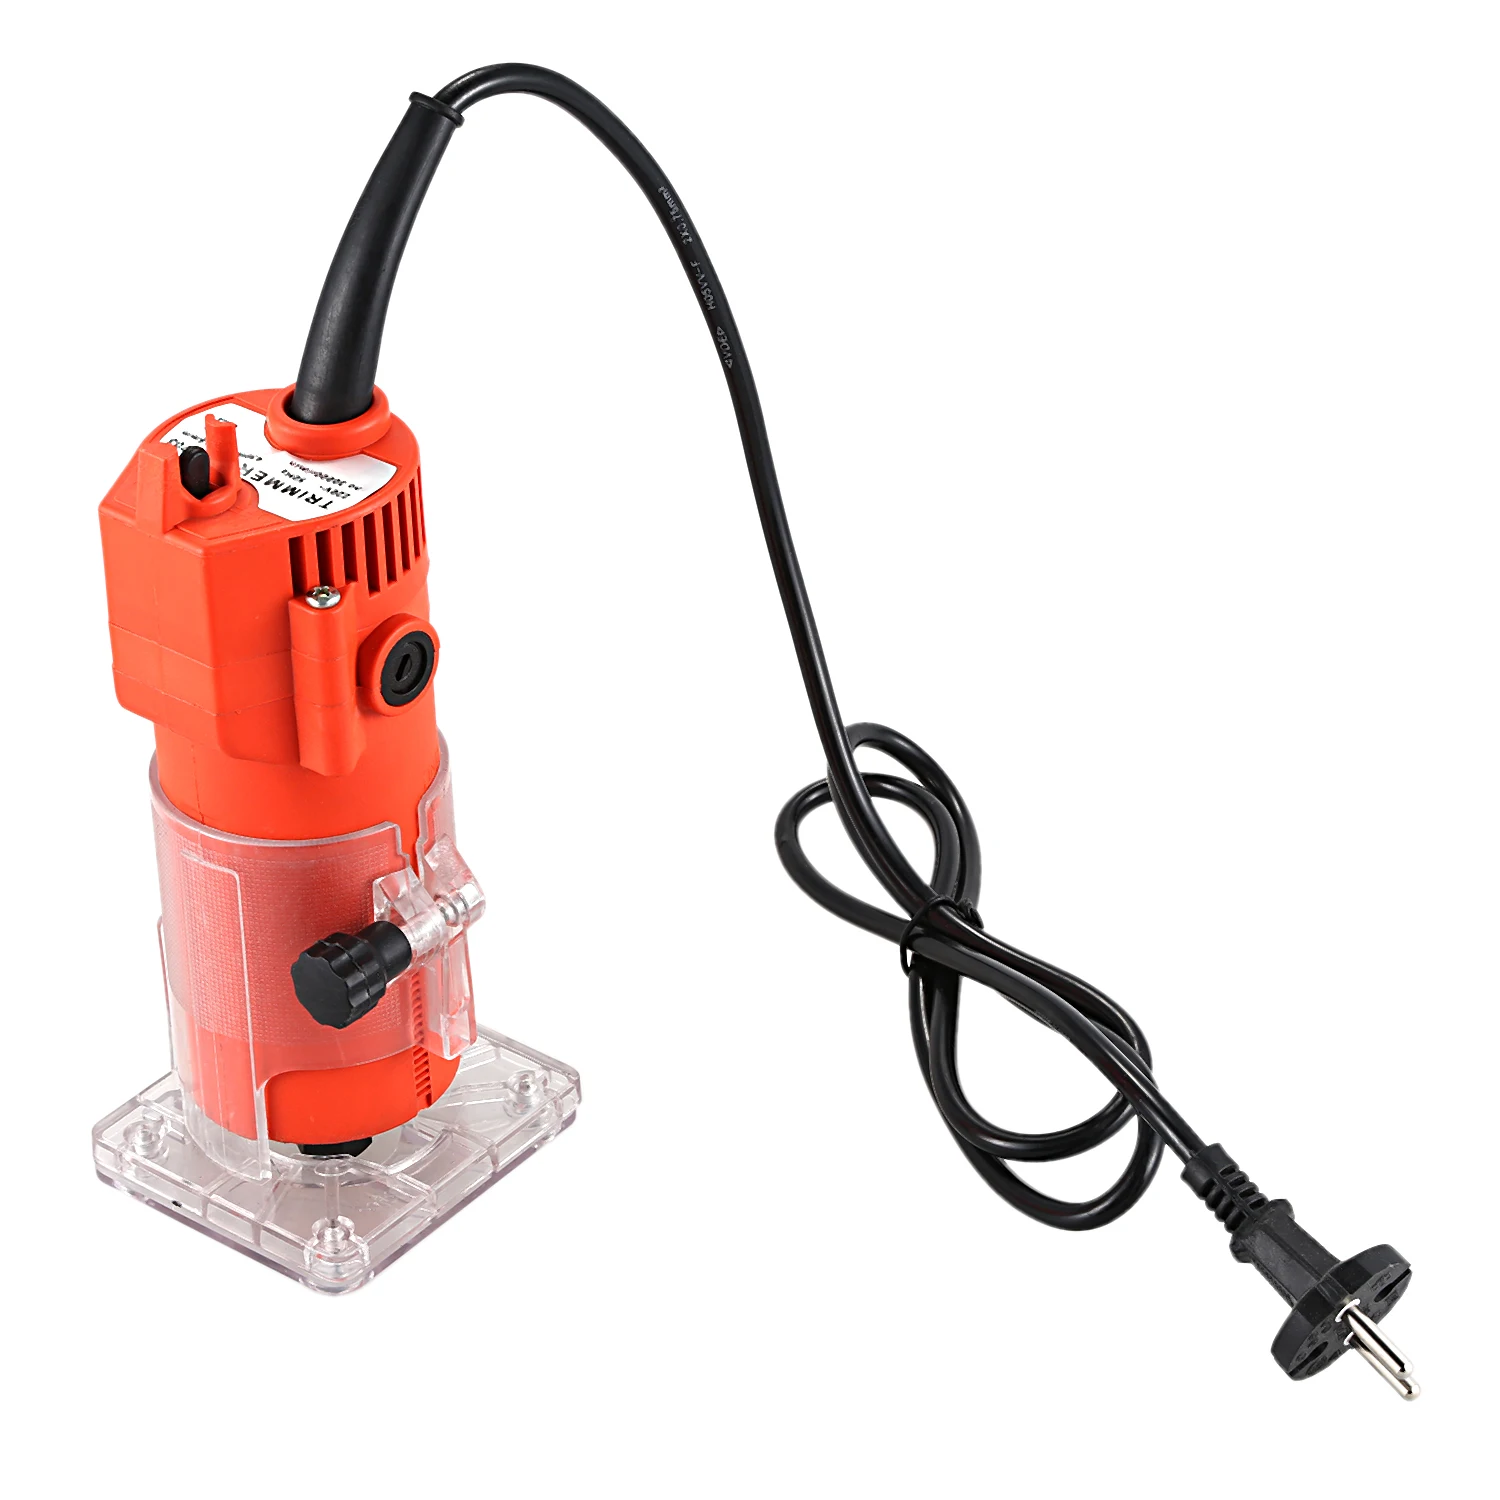 Router Trimmer 350W/600w 30000rpm Durable Small Copper Motor Carving Machine 6mm Electric Woodworking Power Tool Wood | Инструменты